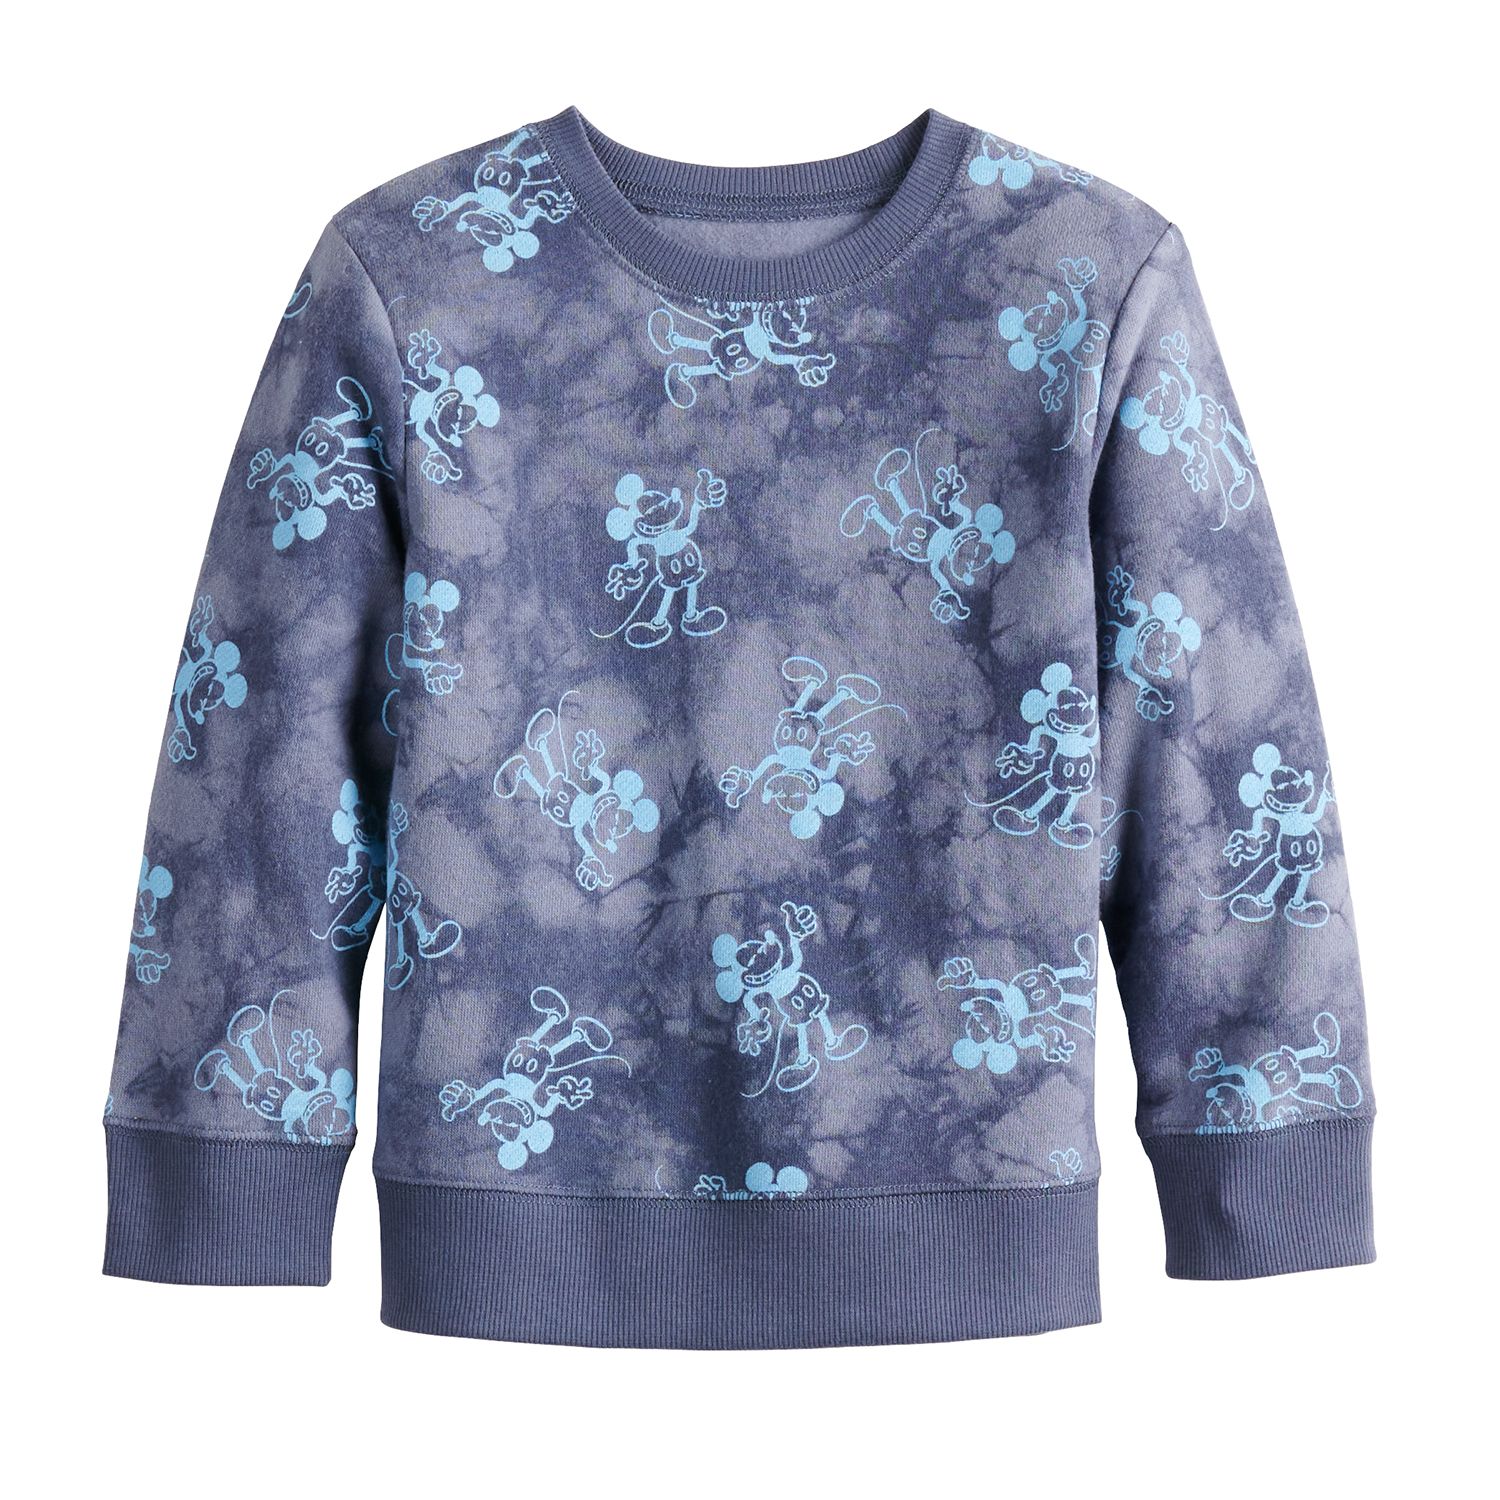 Image for Disney/Jumping Beans Disney's Mickey Mouse Toddler Boy Fleece Tie Dyed Sweatshirt by Jumping Beans® at Kohl's.